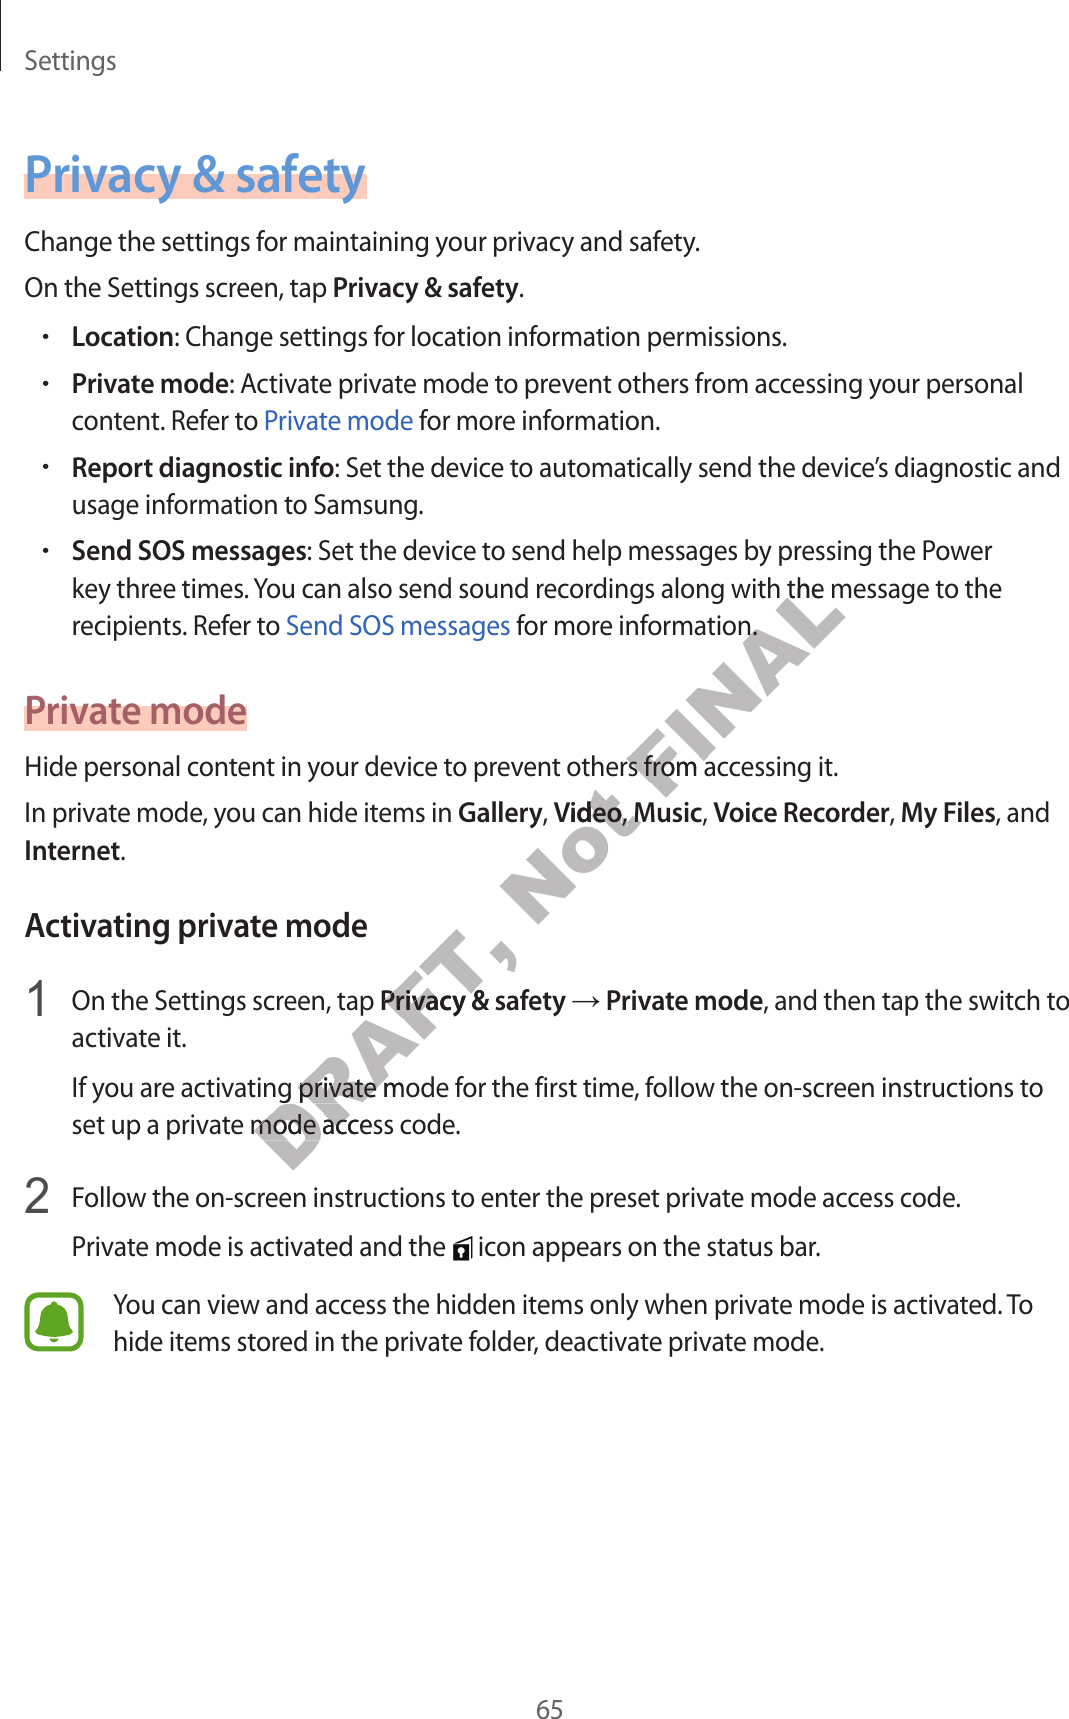 Settings65P rivacy &amp; safetyChange the settings for maintaining y our privacy and safety.On the Settings screen, tap Priv acy &amp; safety.•Location: Change settings for location information permissions.•Priv at e mode: Activate privat e mode t o pr ev ent others fr om ac cessing y our personal conten t. Ref er t o P riva te mode f or mor e information.•Report diagnostic info: Set the device to automatically send the devic e’s diagnostic and usage information t o Samsung .•Send SOS messages: Set the device to send help messages by pr essing the Power key three times . You can also send sound recordings along with the message t o the recipients . Ref er t o Send SOS messages for mor e information.Priv a te modeHide personal content in y our device t o pr ev ent others fr om ac c essing it.In private mode, y ou can hide it ems in Gallery, Video, Music, Voice Recor der, My F iles, and Internet.Activating priv at e mode1  On the Settings screen, tap Priv acy &amp; safety → Priv at e mode, and then tap the switch to activate it.If you are activating private mode for the first time, follo w the on-scr een instructions to set up a private mode acc ess c ode .2  Follow the on-screen instructions to enter the pr eset privat e mode ac cess c ode .Priva te mode is activated and the   icon appears on the status bar.You can view and access the hidden items only when private mode is activated . To hide items stor ed in the privat e f older, deactivate private mode .DRAFT, On the Settings screen, tap DRAFT, On the Settings screen, tap Priv acy &amp; safetyDRAFT, Priv acy &amp; safetyDRAFT, If you are activating private mode for the first time, follo w the on-scr een instructions to DRAFT, If you are activating private mode for the first time, follo w the on-scr een instructions to set up a private mode acc ess c ode .DRAFT, set up a private mode acc ess c ode .Not Hide personal content in y our device t o pr ev ent others fr om ac c essing it.Not Hide personal content in y our device t o pr ev ent others fr om ac c essing it.VideoNot Video, Not , MusicNot MusicFINALkey three times . You can also send sound recordings along with the message t o the FINALkey three times . You can also send sound recordings along with the message t o the  for mor e inf ormation.FINAL for mor e inf ormation.Hide personal content in y our device t o pr ev ent others fr om ac c essing it.FINALHide personal content in y our device t o pr ev ent others fr om ac c essing it.